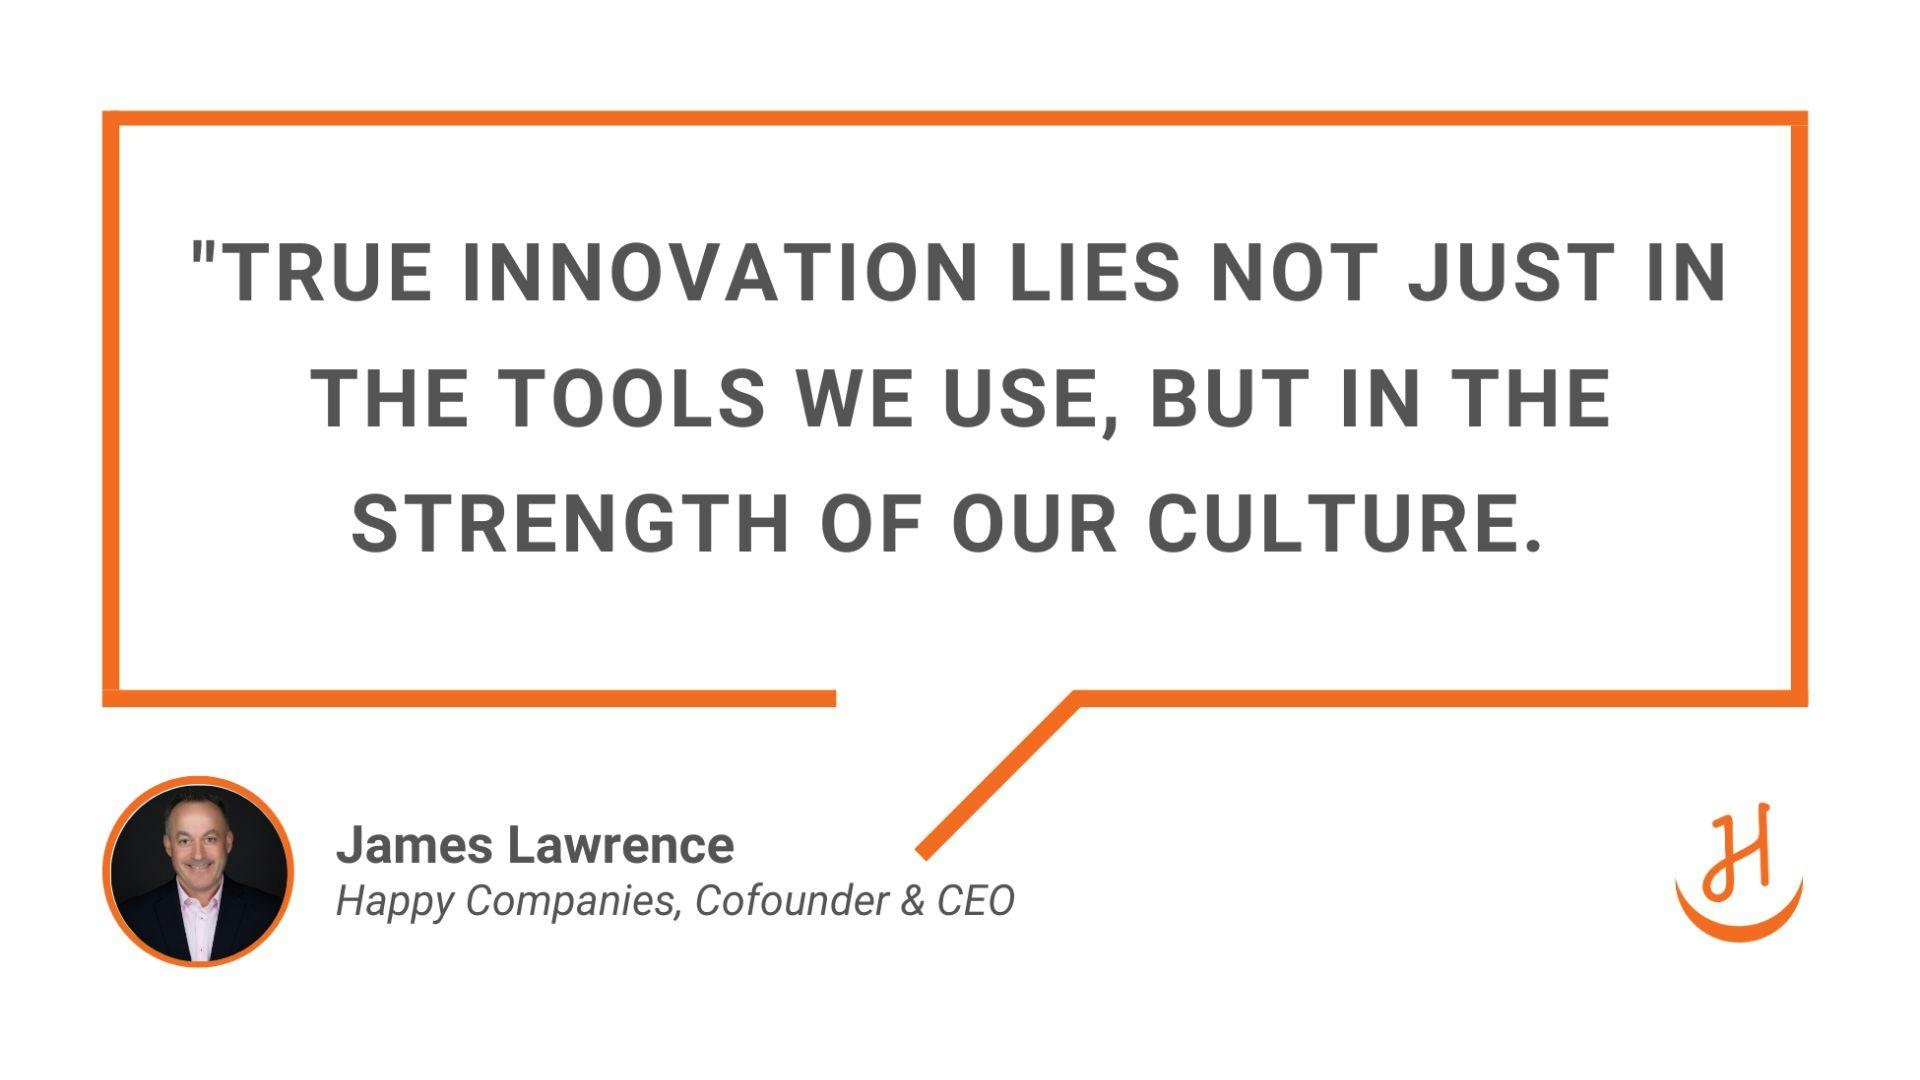 Quote: "True innovation lies not just in the tools we use, but in the strength of our culture." James Lawrence, Happy Companies Cofounder & CEO 